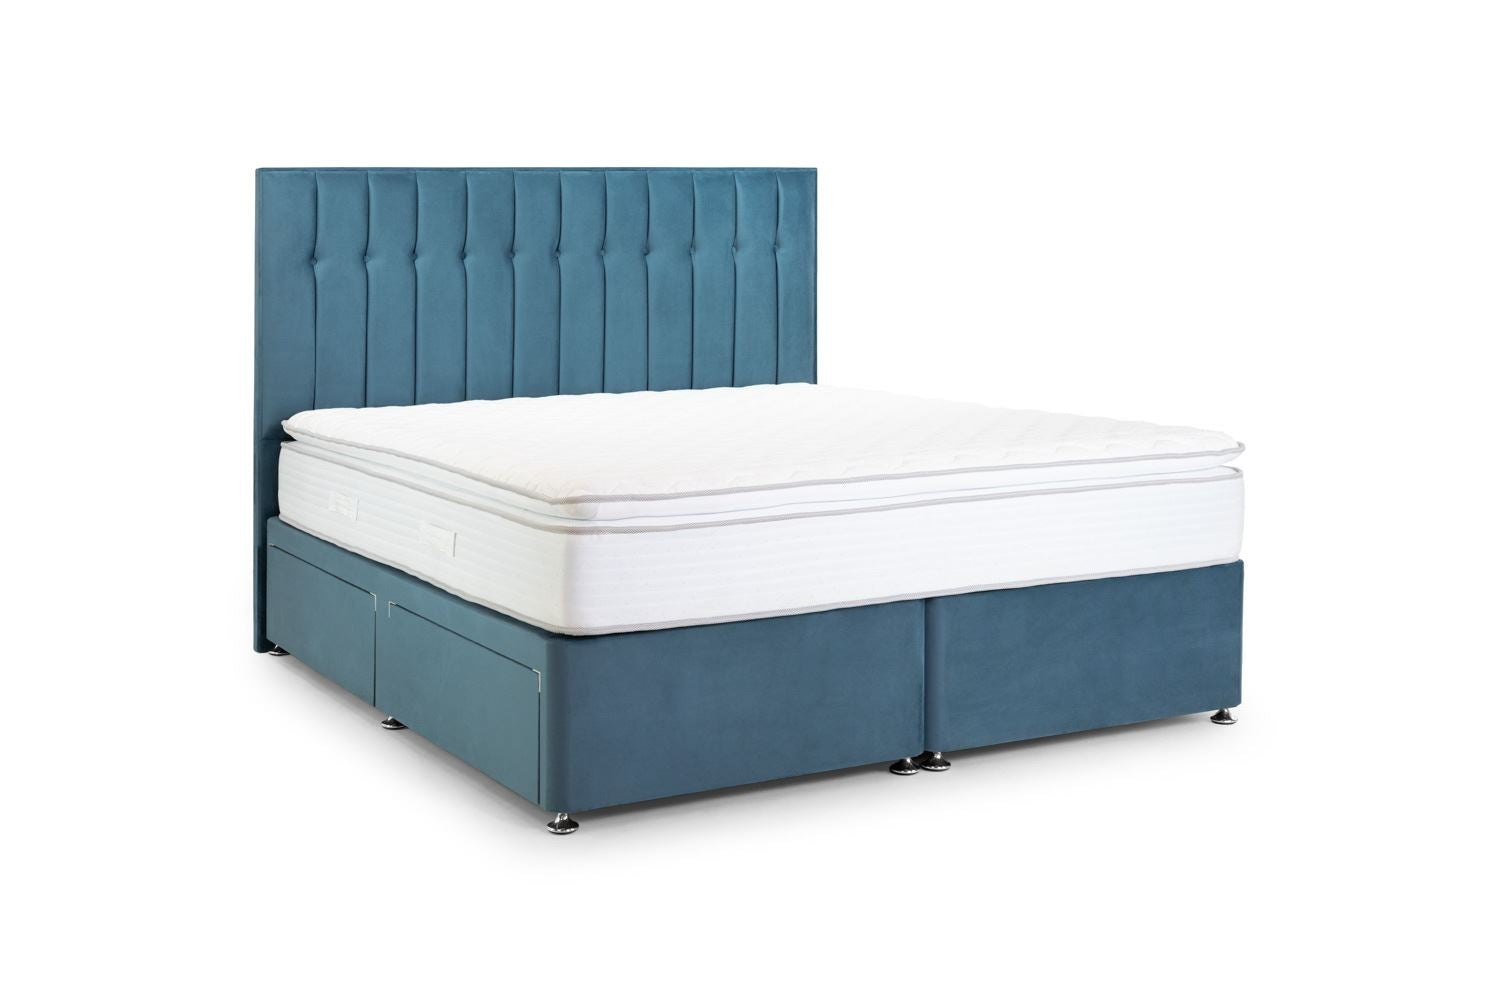 Peri 4 Drawer Bed Double Plush Teal 4 Drawers